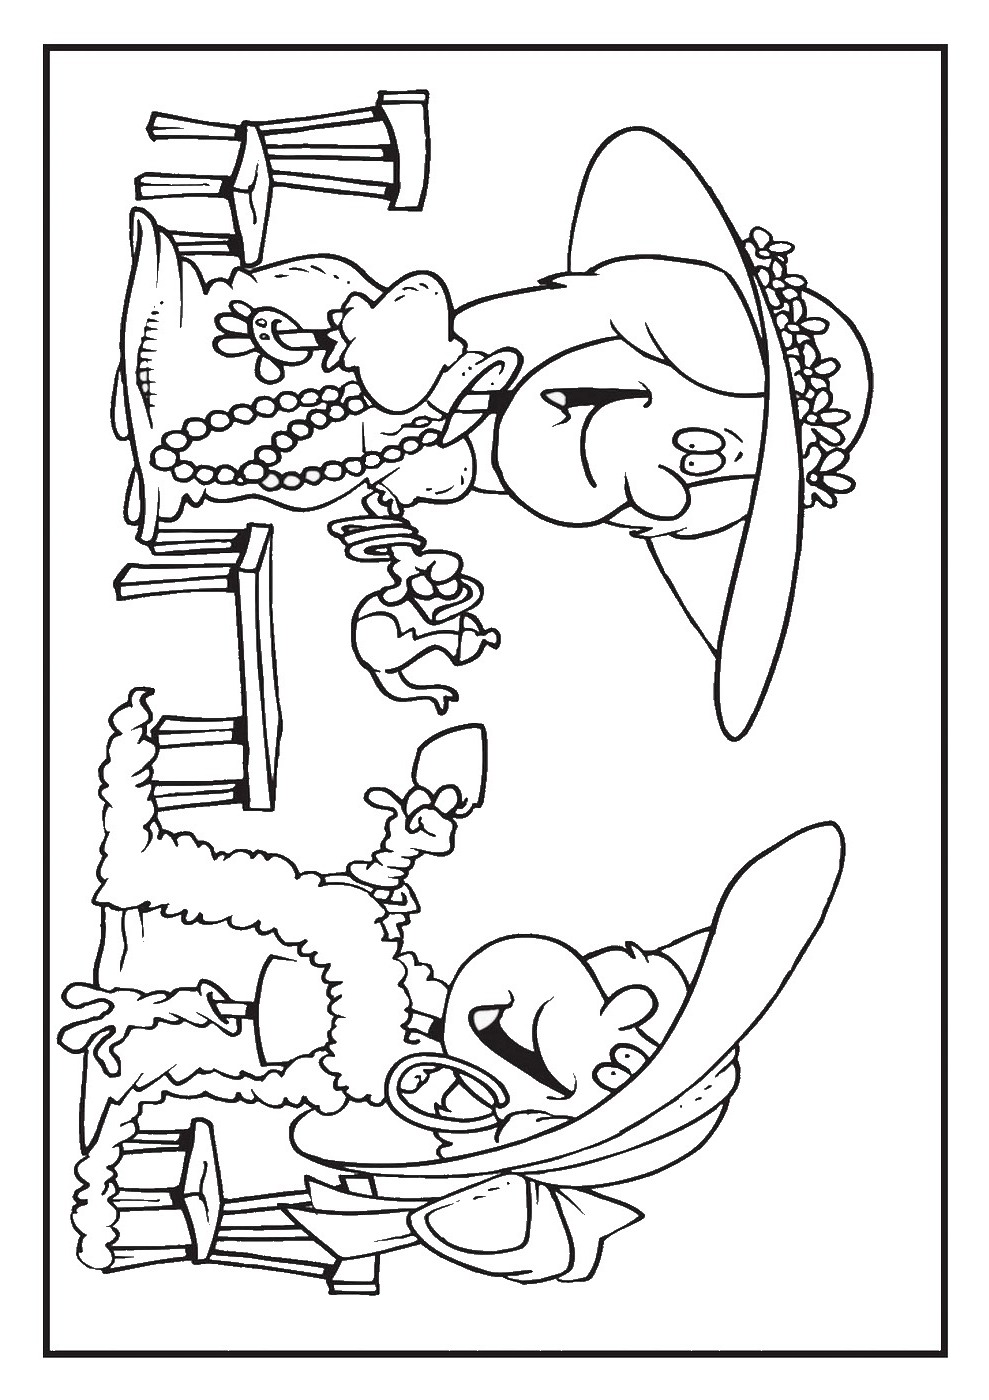 Boston Tea Party Coloring Coloring Pages